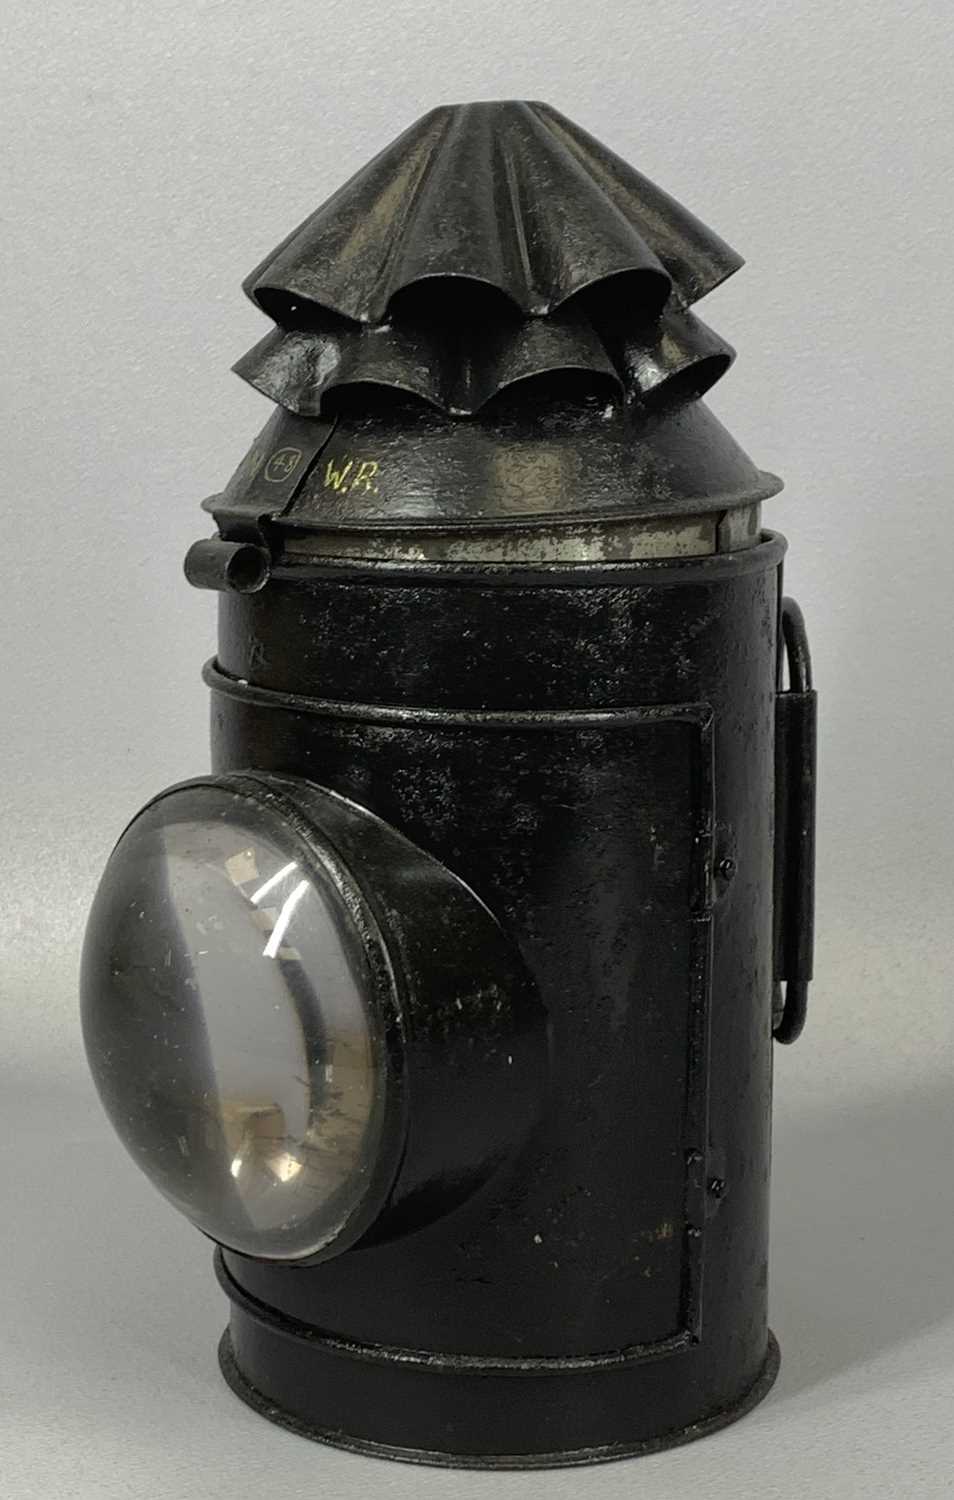 VINTAGE STEEL LNWR RAILWAY SIGNAL LAMP with bullseye lens with burner, 26cms (h) Provenance: private